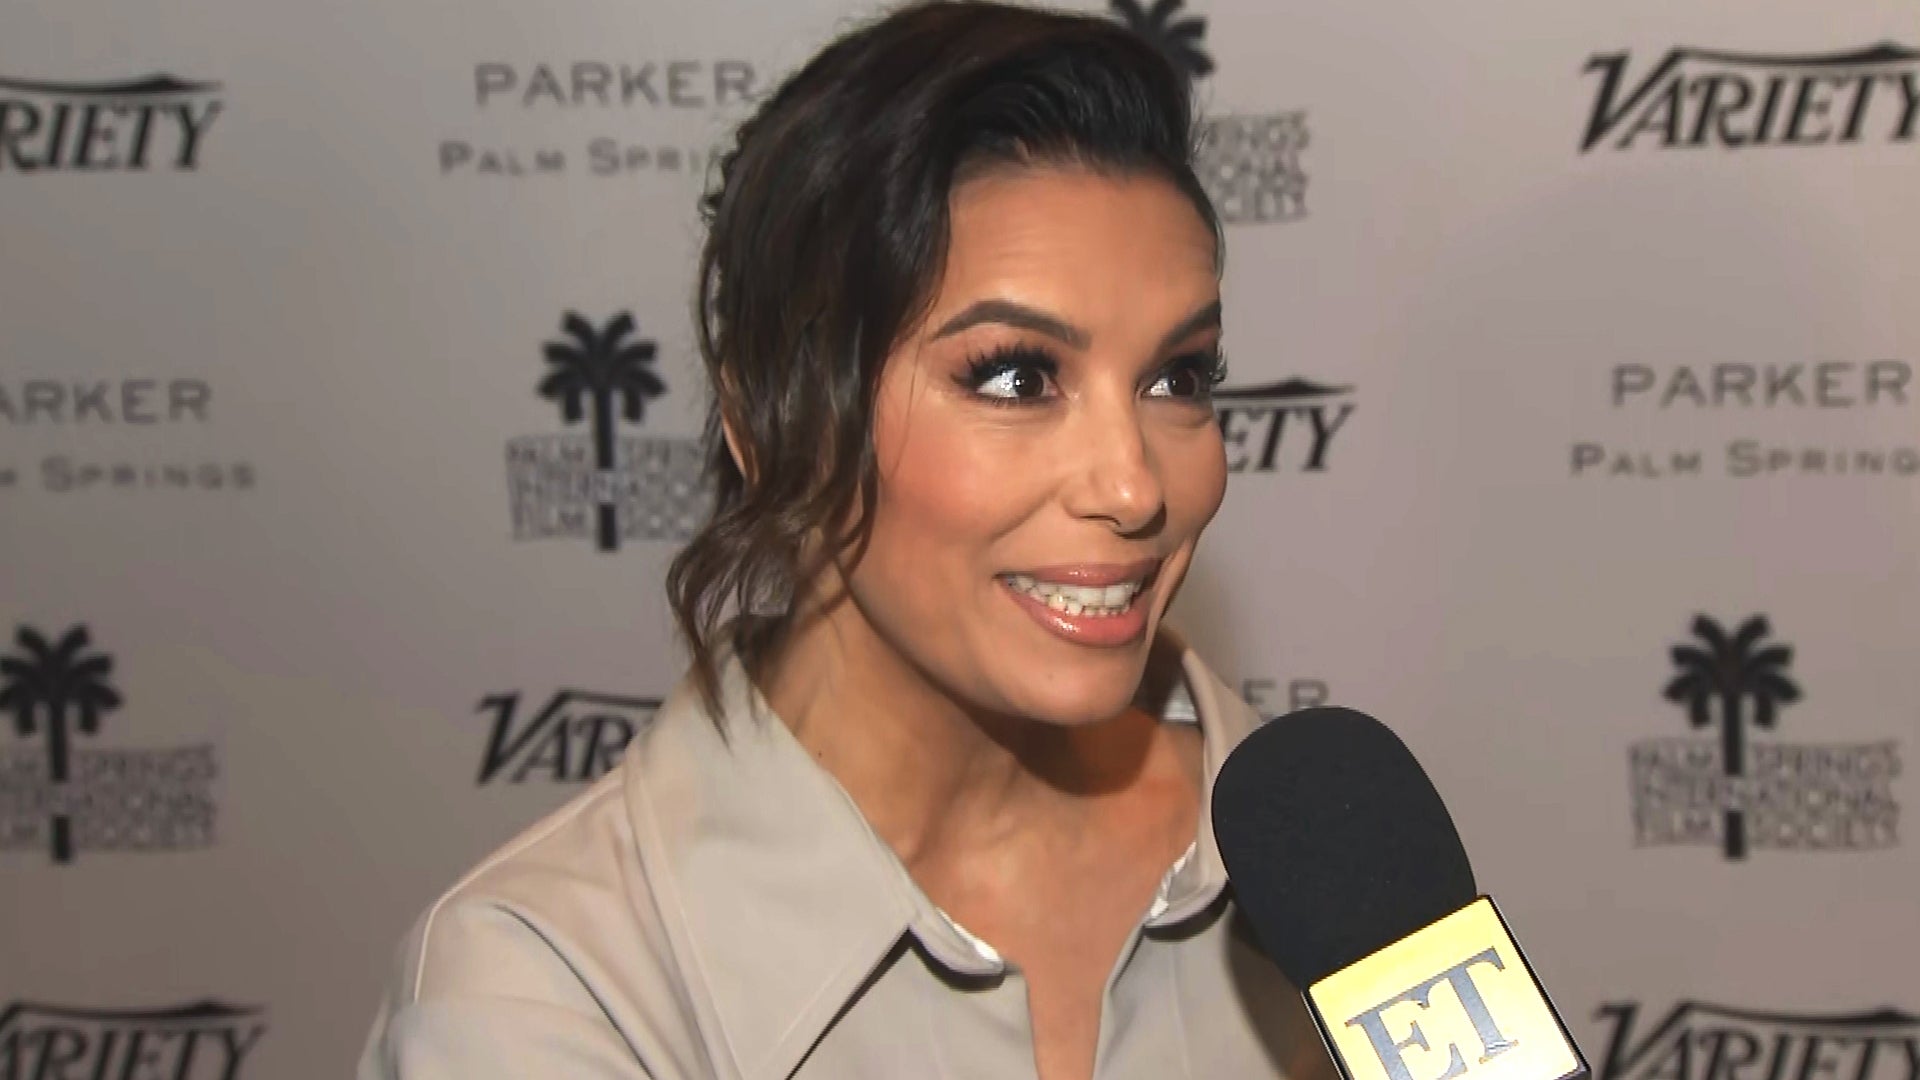 Eva Longoria Calls Her Acting Career an Accident as She Pivots to ‘True’ Love Directing (Exclusive)